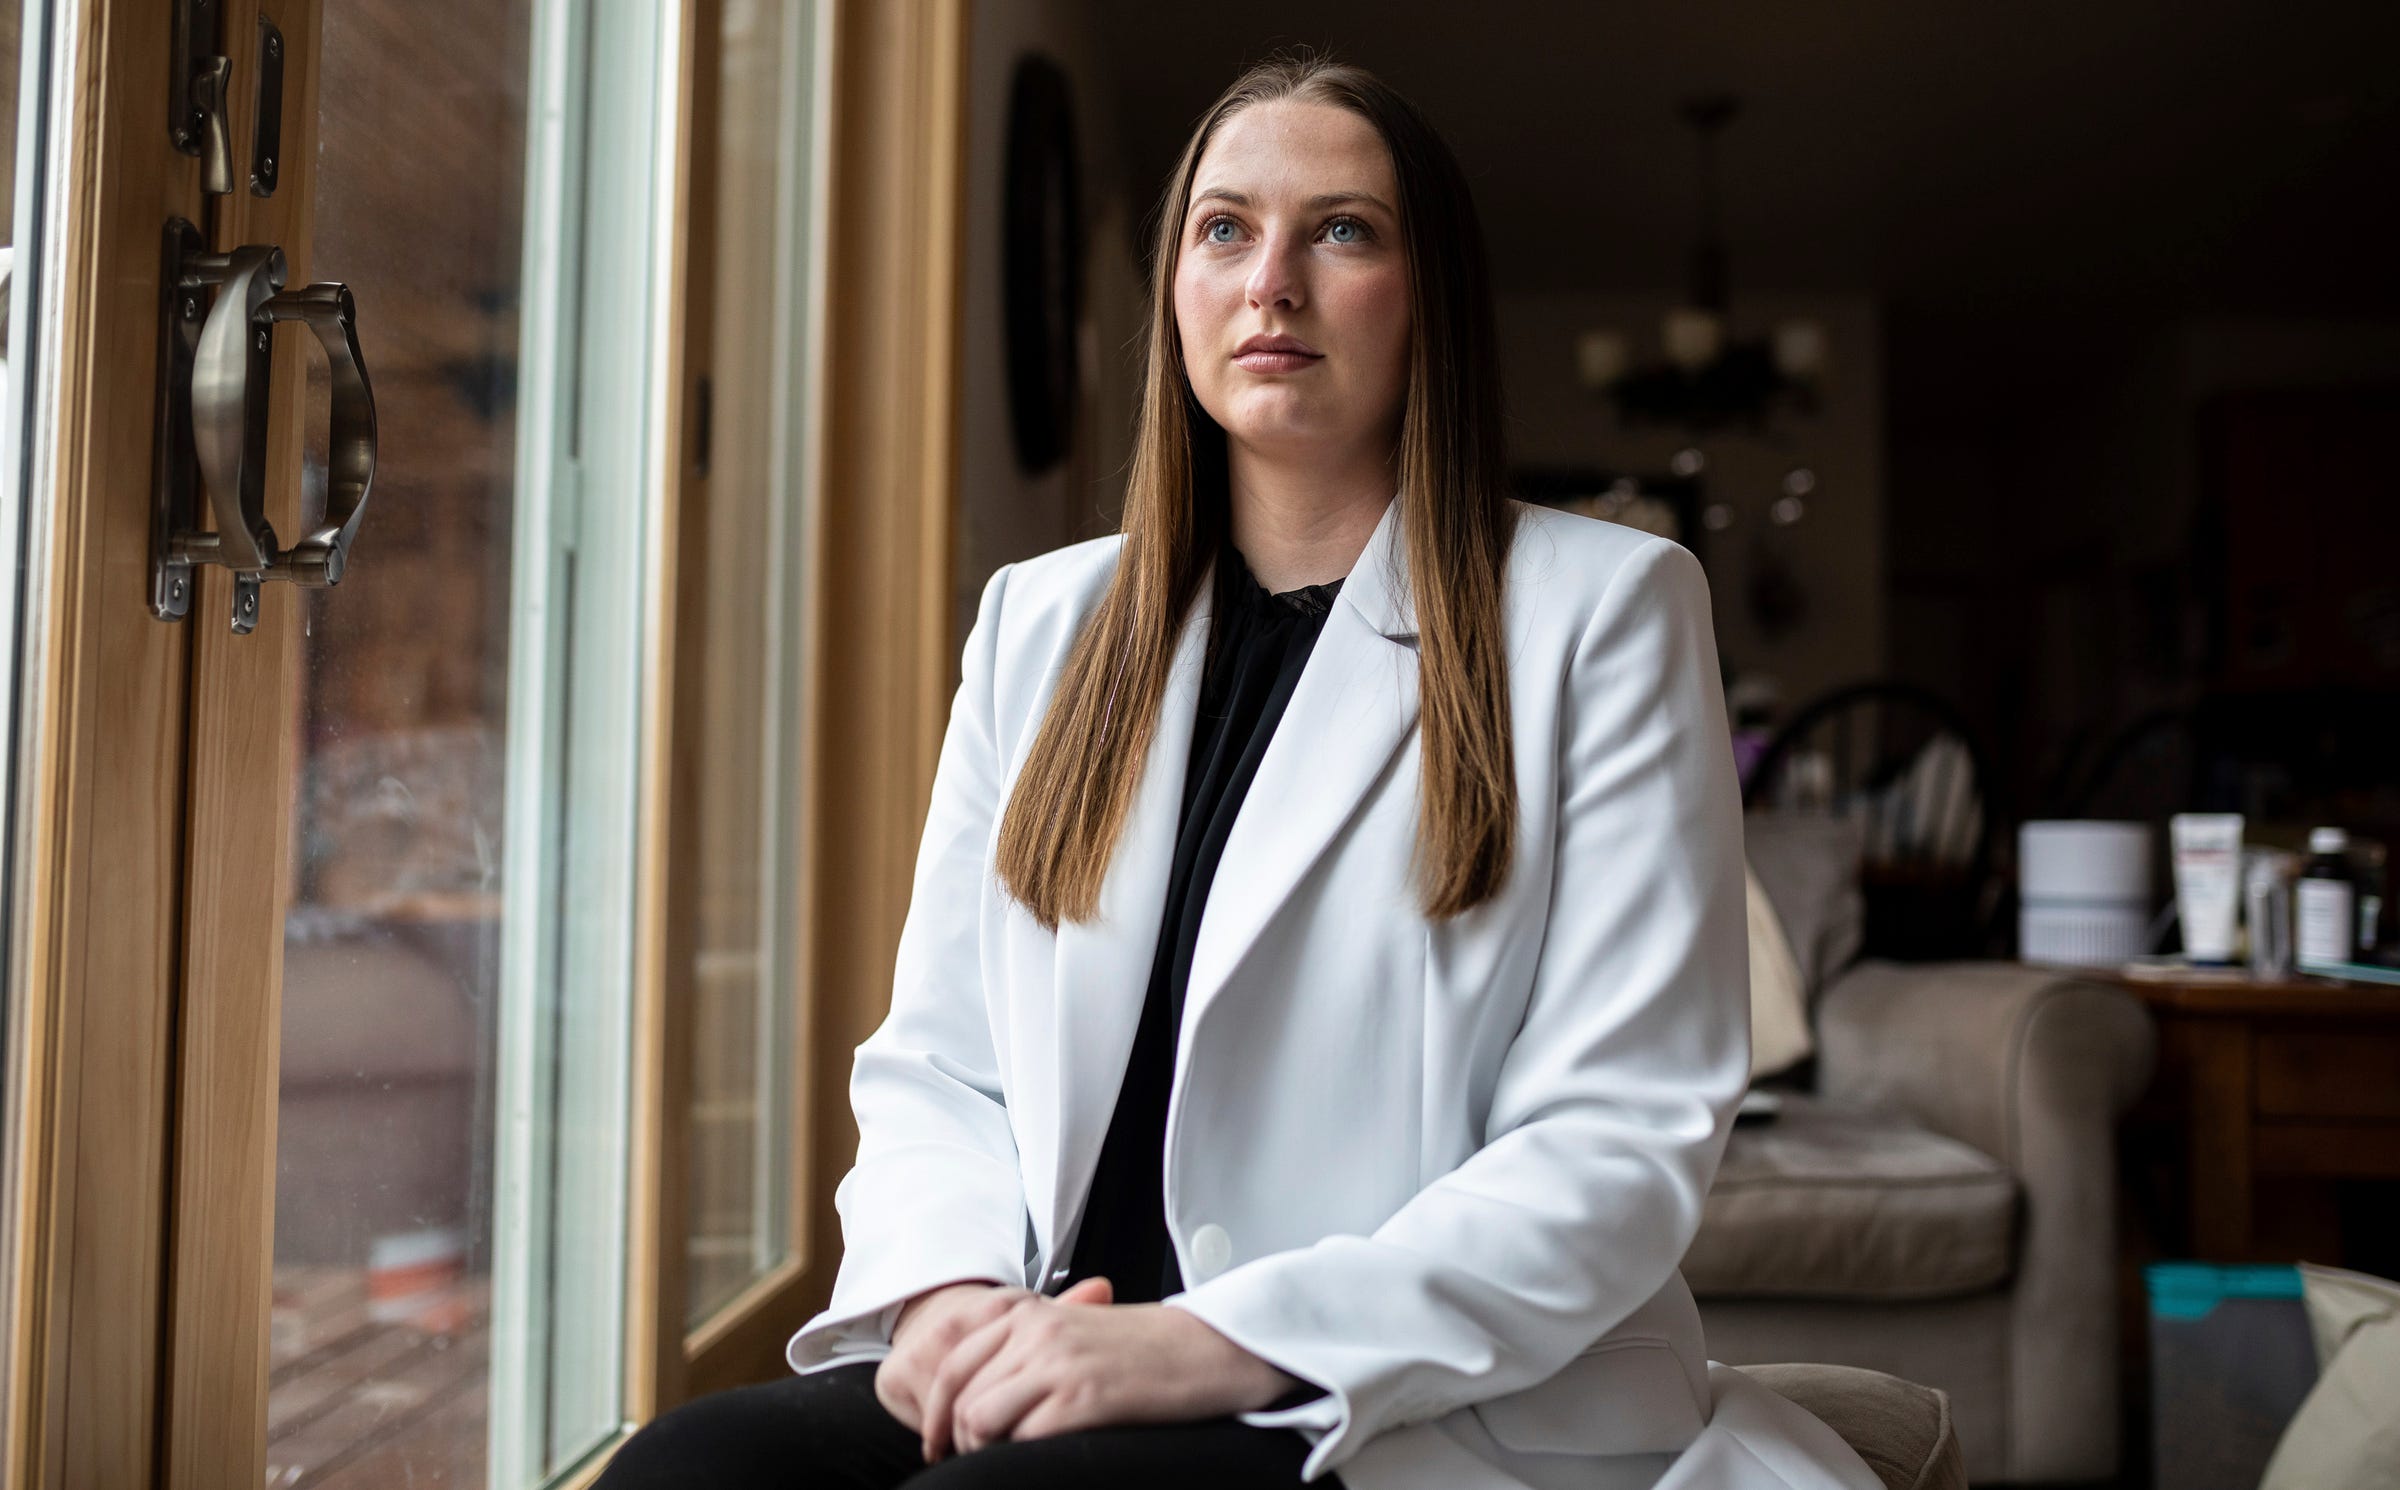 Michigan State University alumna Hannah Smith, 25, sits inside her home in Genesee County, Michigan, on Thursday, Dec. 8, 2022. Smith filed a complaint with the Office for Civil Rights alleging Michigan State mishandled her sexual harassment case.